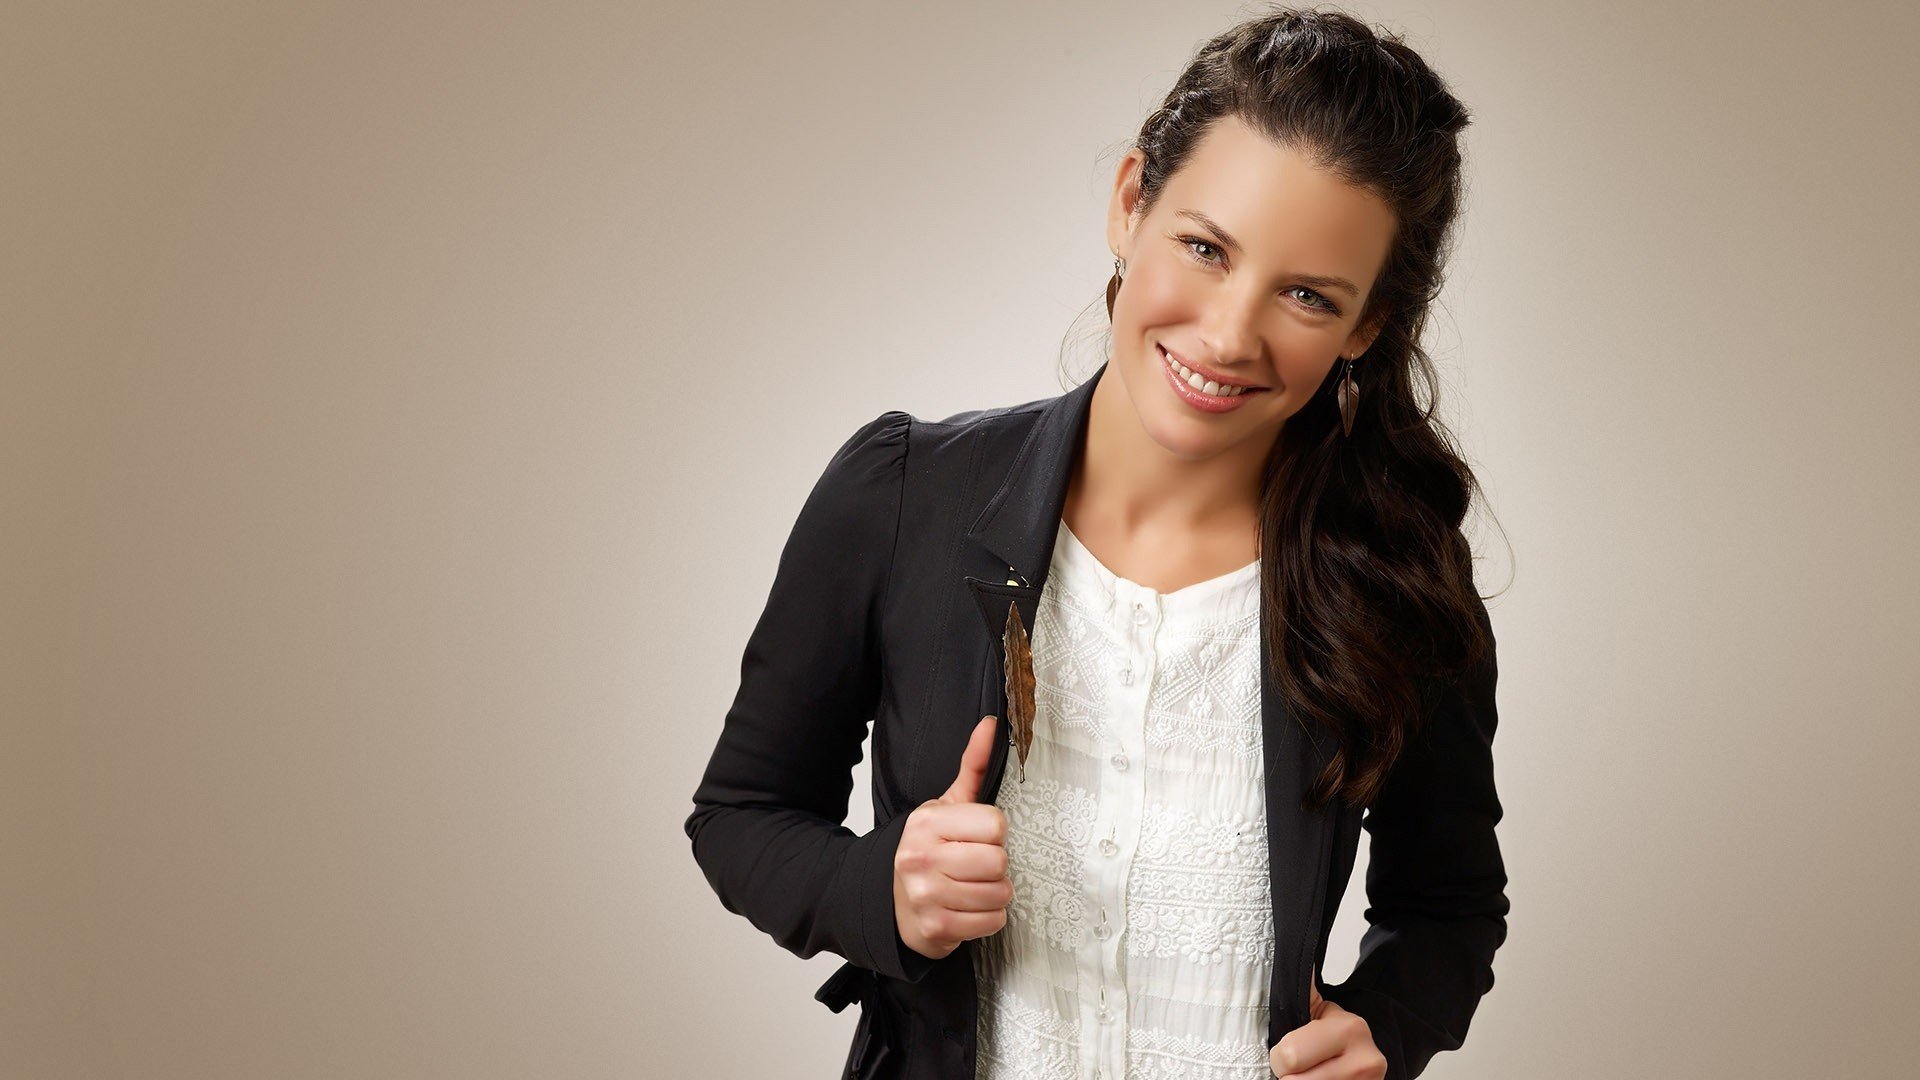 Photo for Evangeline Lilly: HD Wallpapers